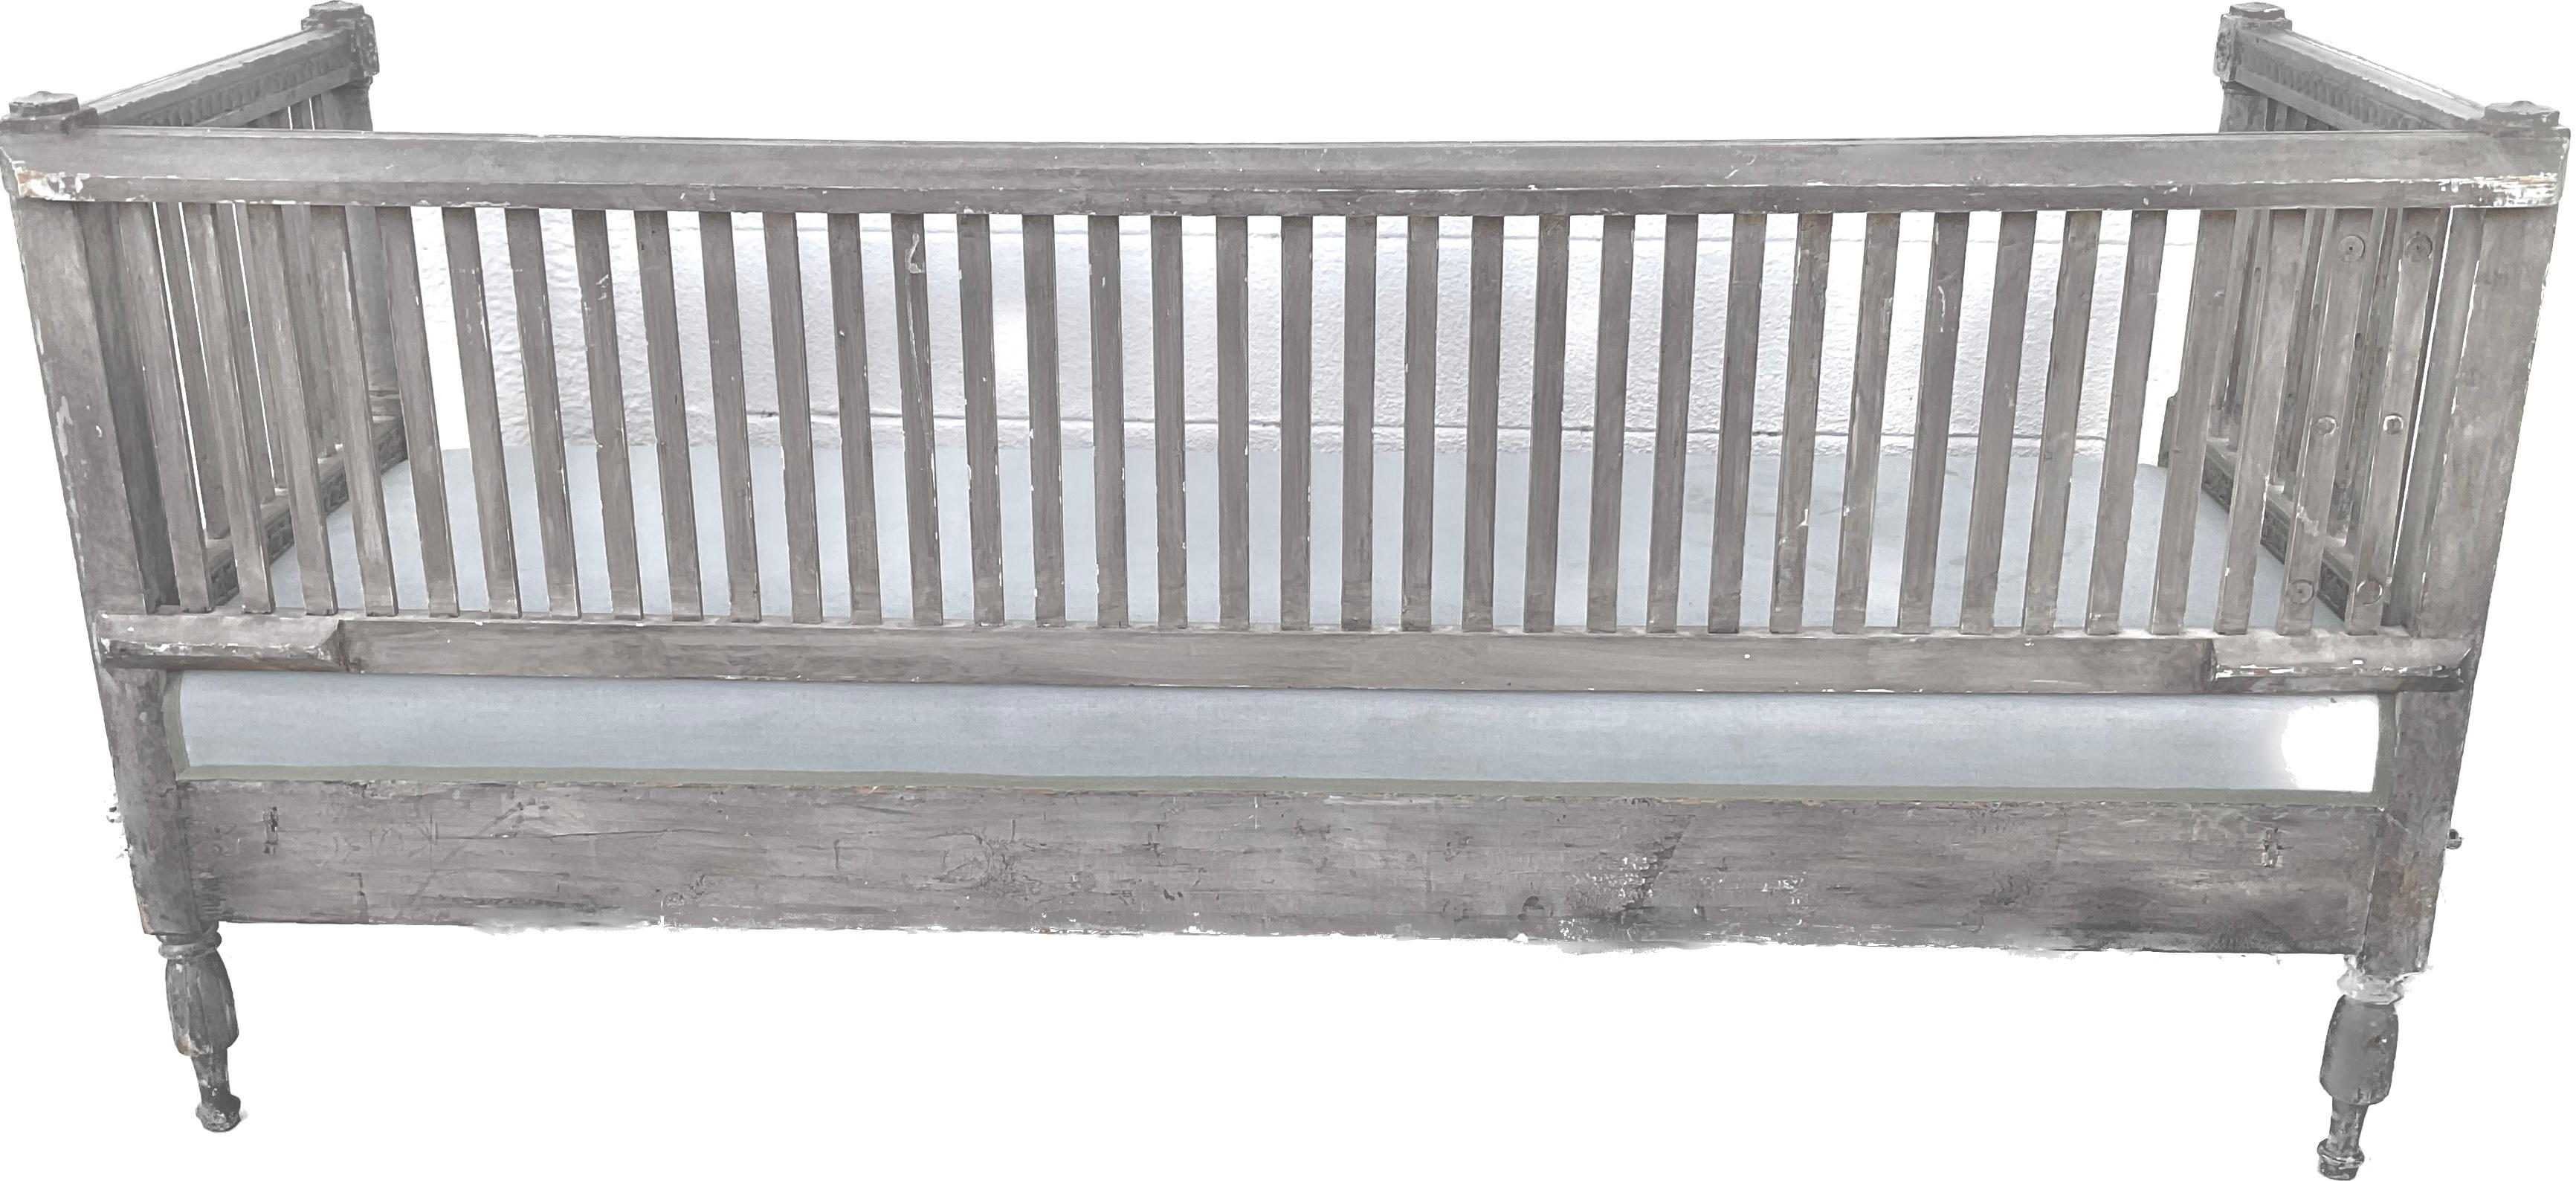 Early 19th century antique Gustavian daybed or sofa, made in Sweden, circa 1810. Painted a natural grayish blue worn with honest patina. The lovely patina enhances the carved details throughout the frame. Frame has beautiful hand carved